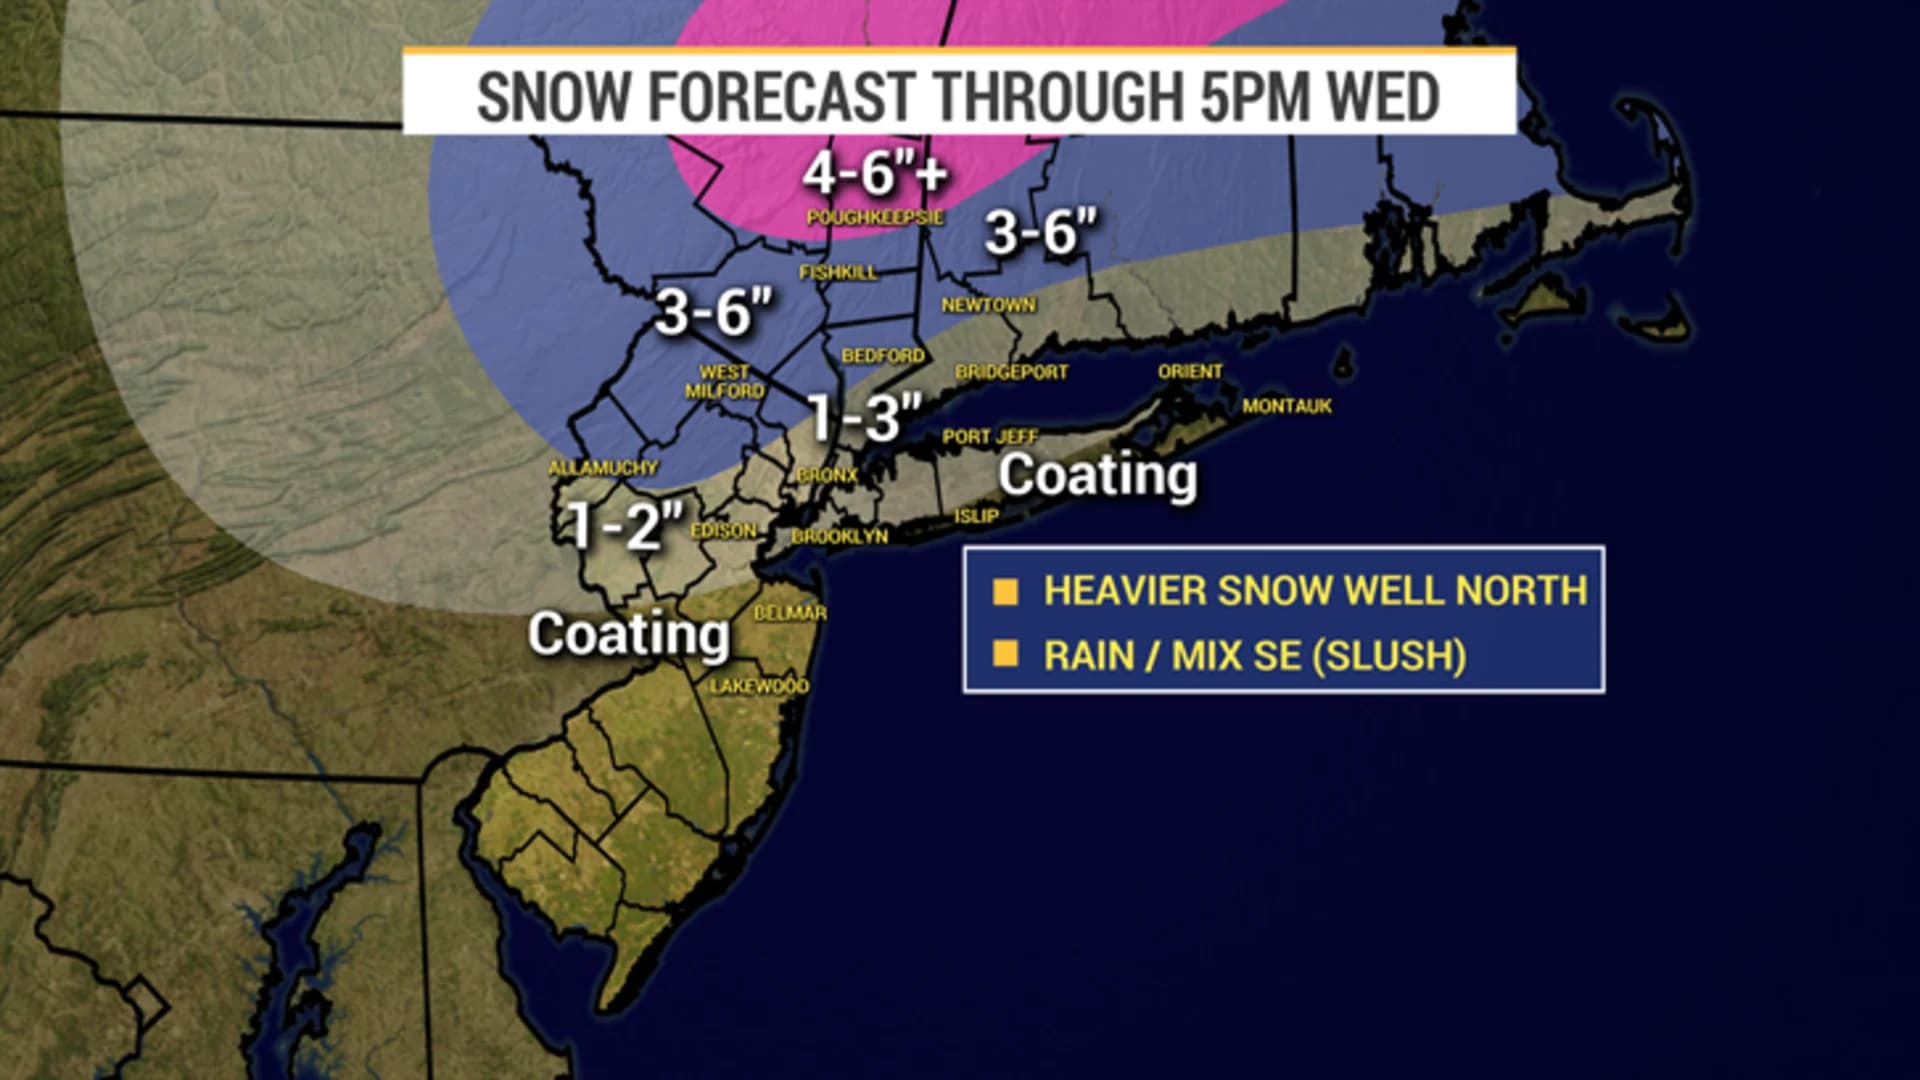 Periods of rain mixed with some snow today for LI